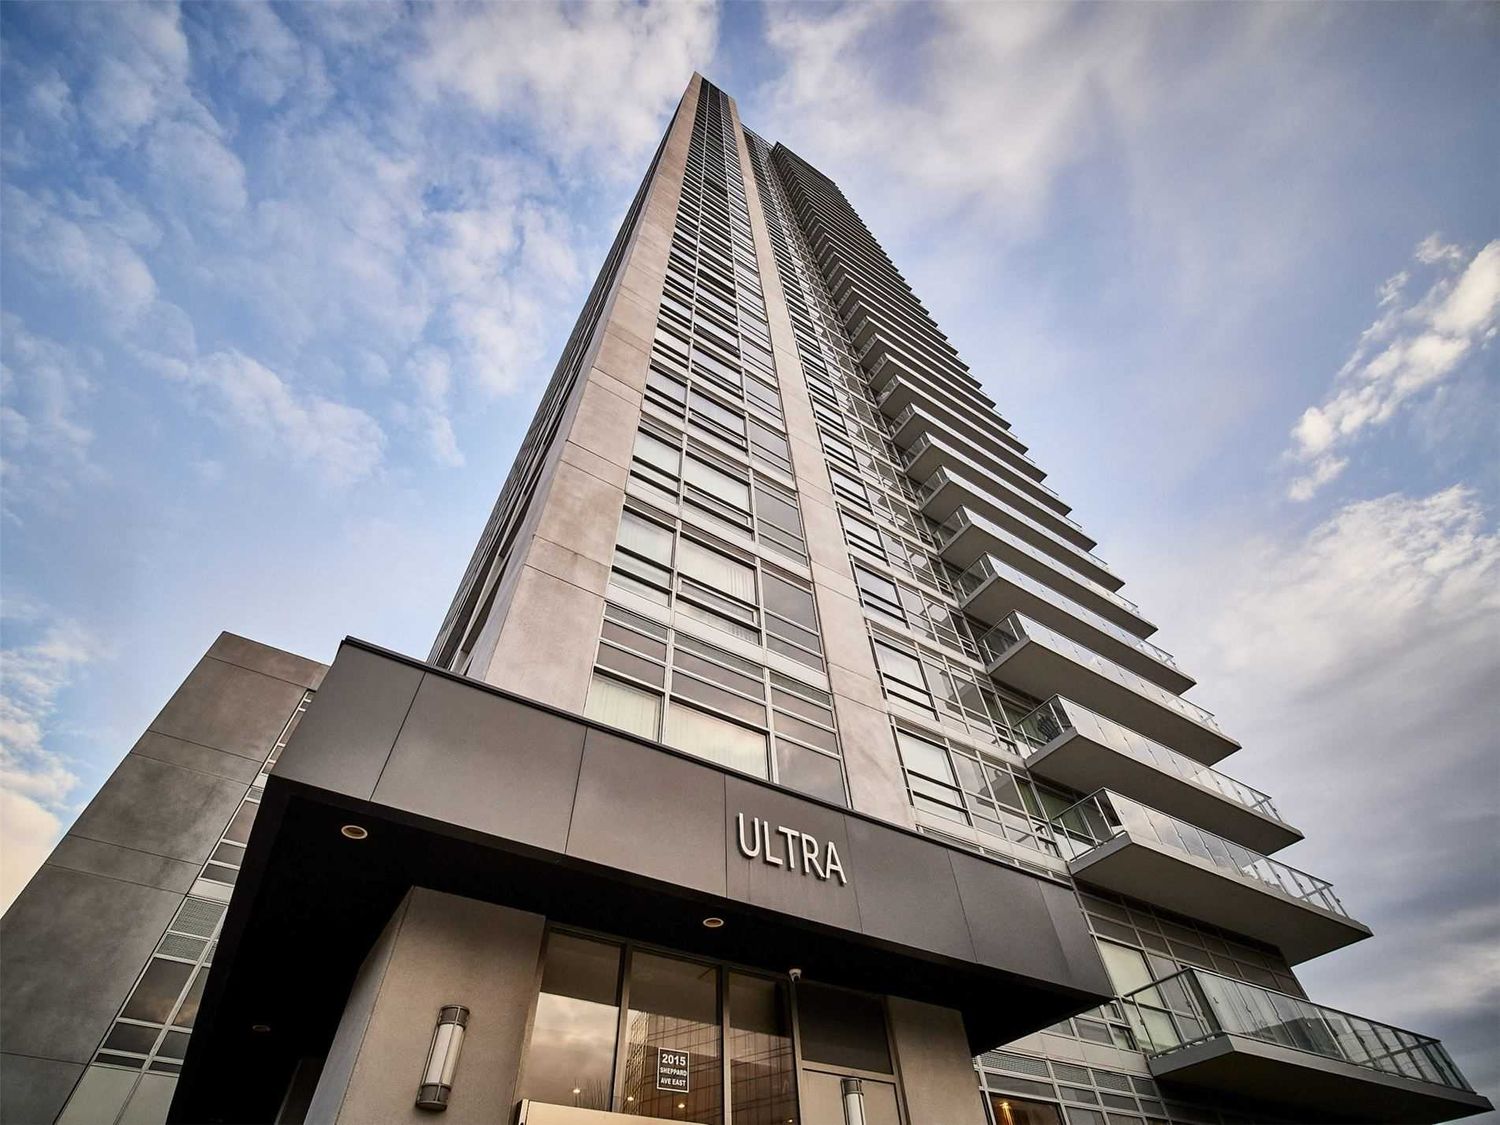 2015 Sheppard Avenue E. Ultra at Herons Hill Condos is located in  North York, Toronto - image #2 of 2